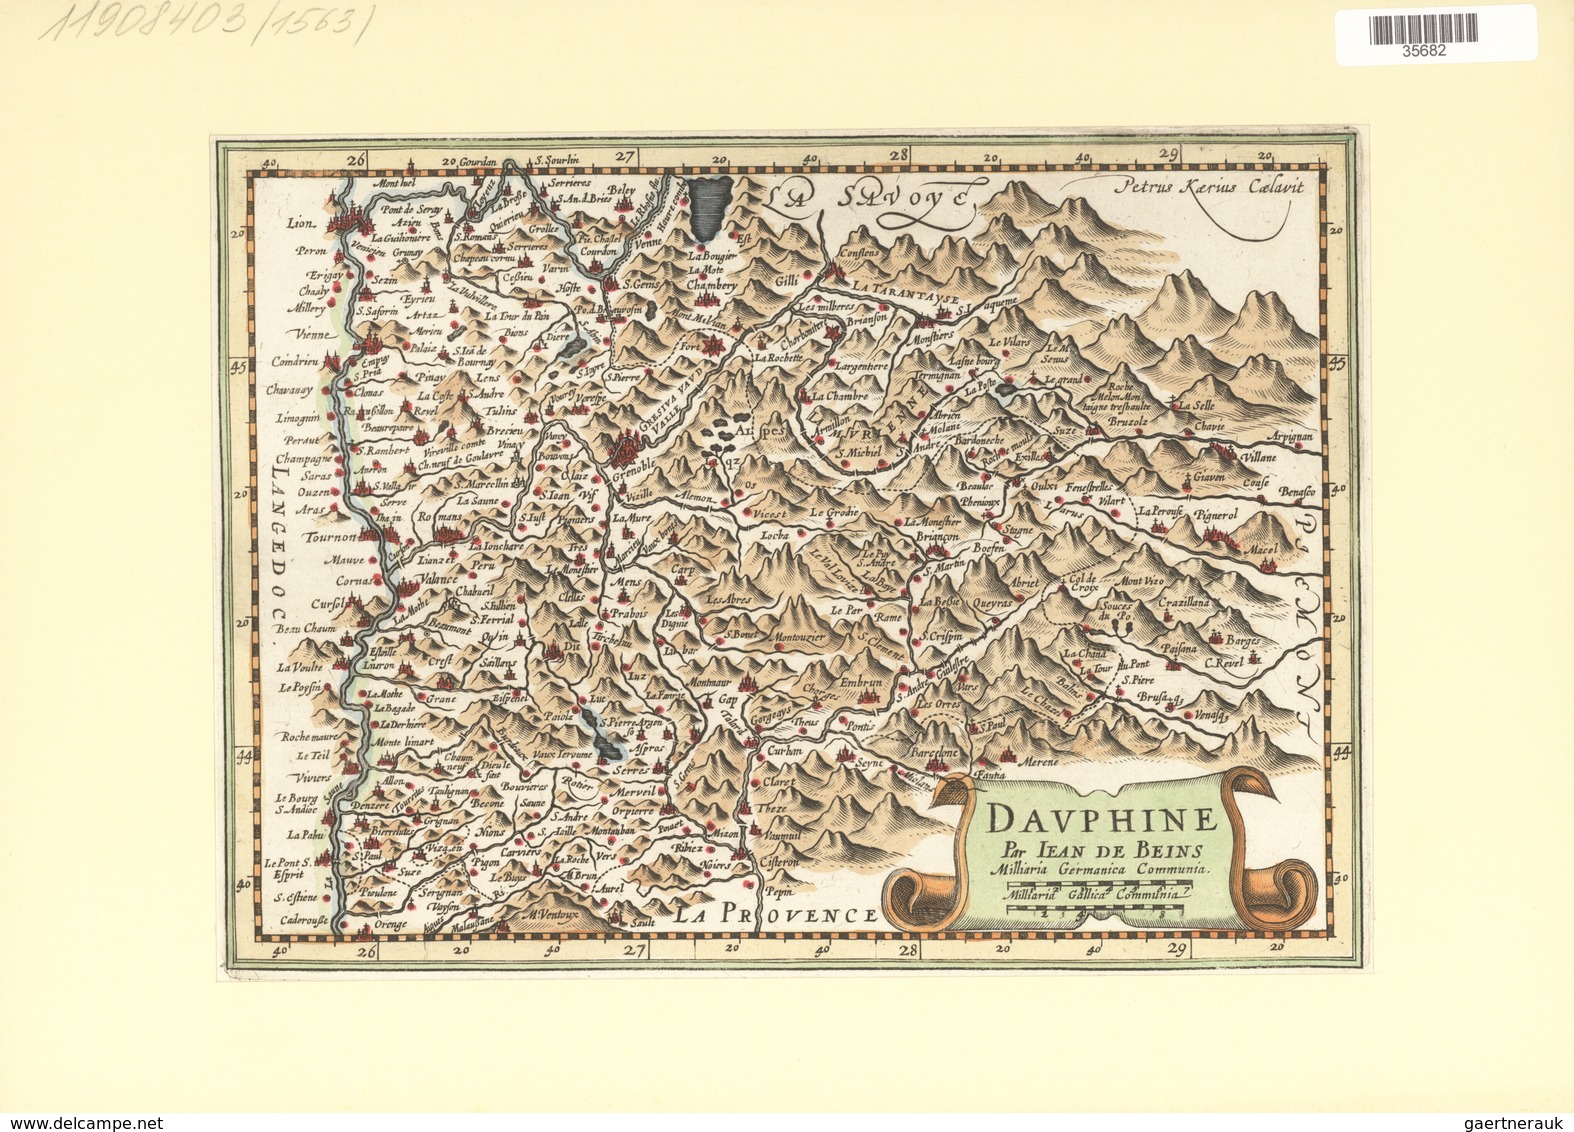 Landkarten Und Stiche: 1734. Map Of Dauphine, France. From The Mercator Atlas Minor Ca 1607, Later A - Geographie